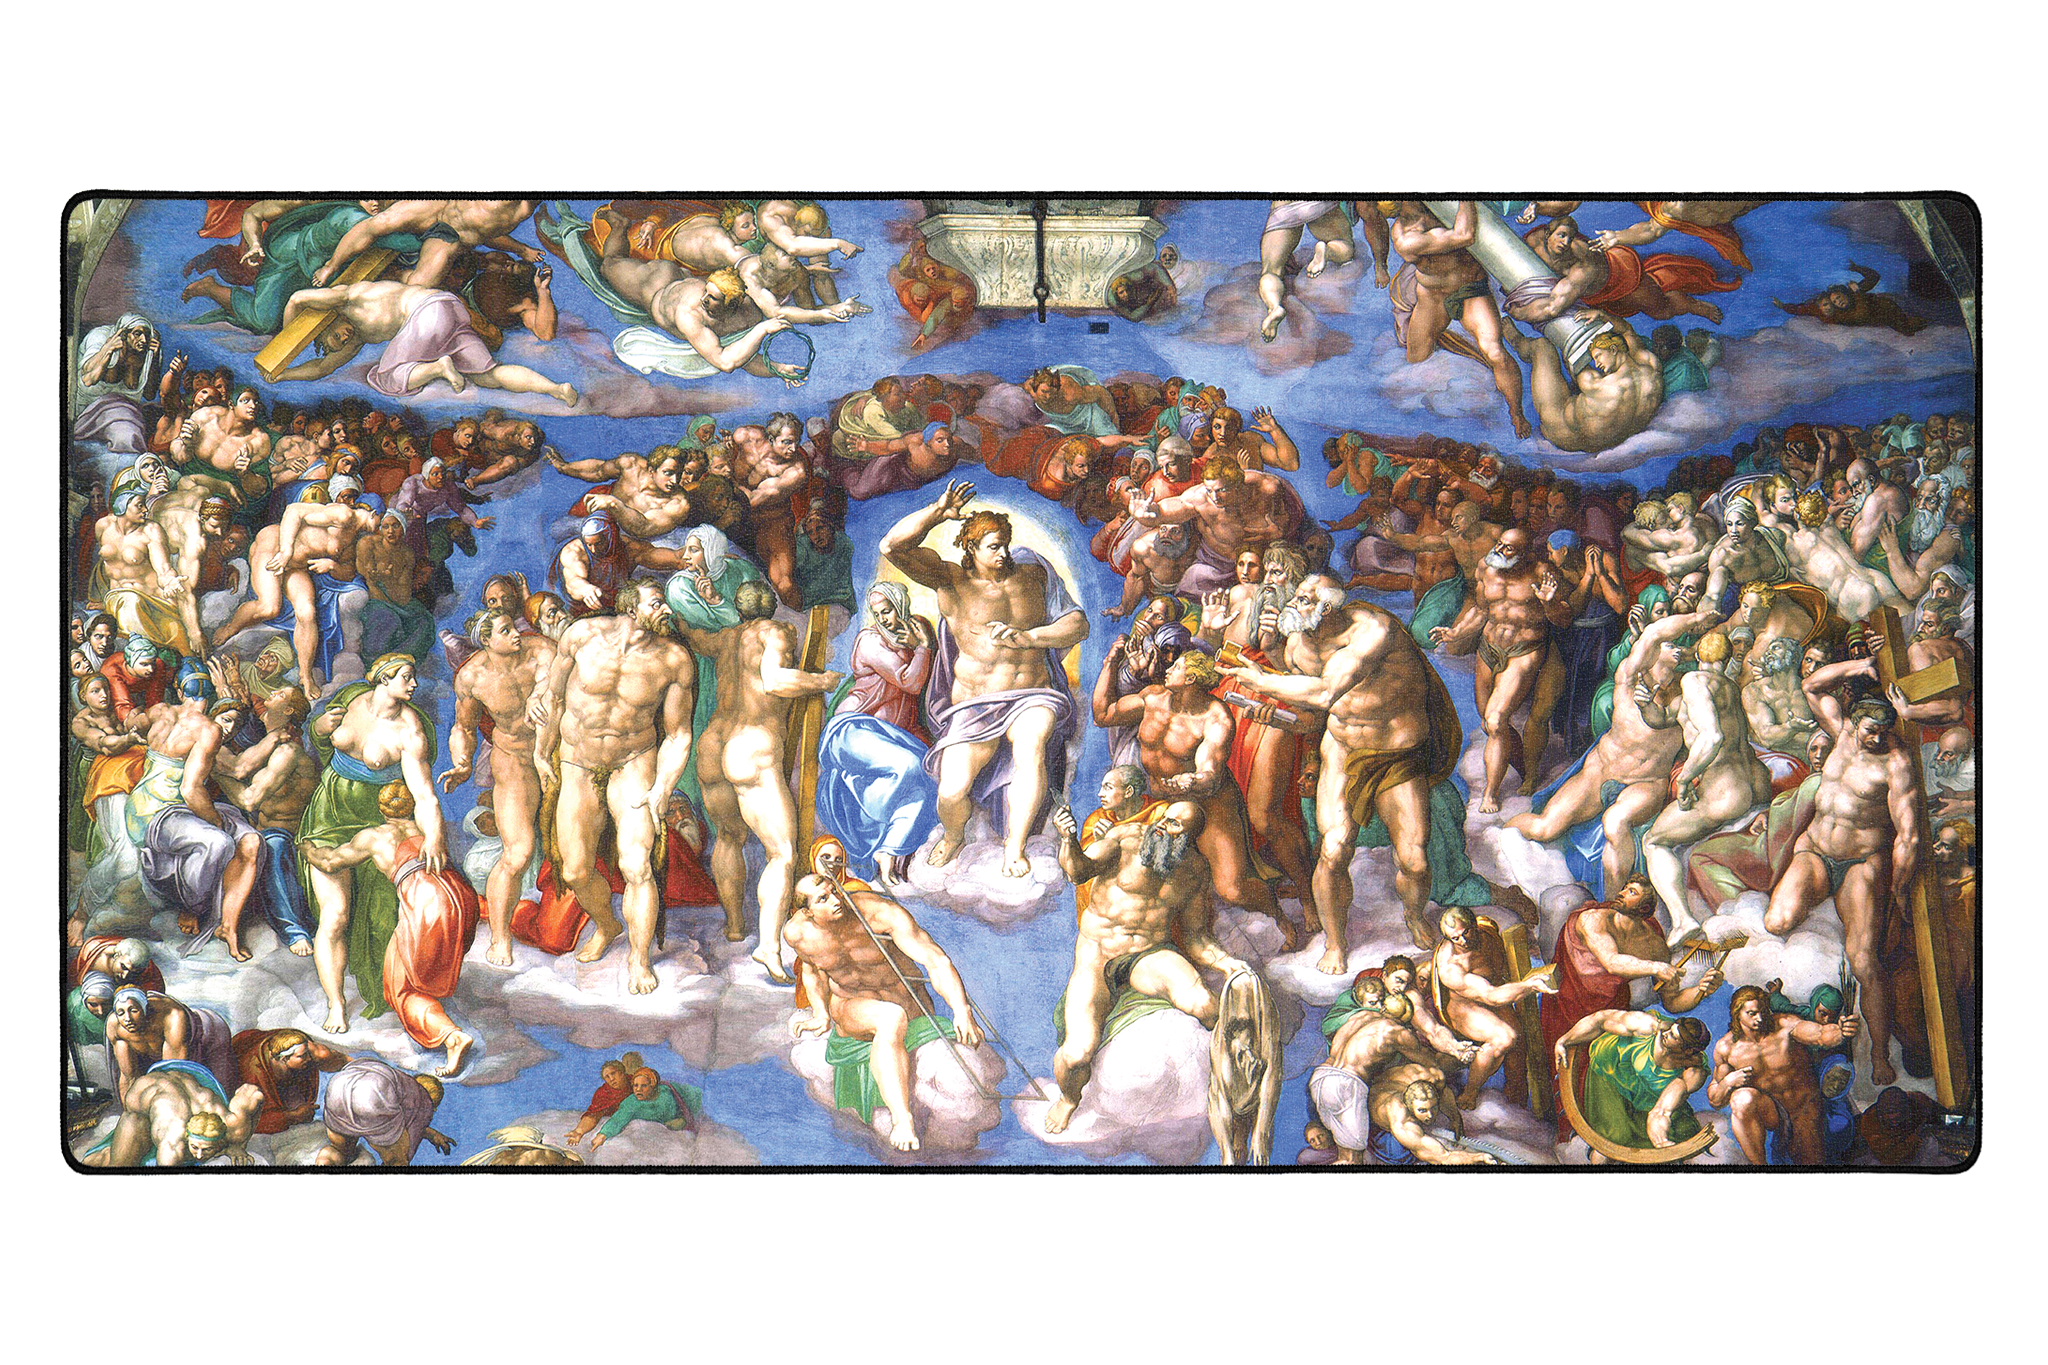 The Last Judgement, by Michelangelo - The Mousepad Company